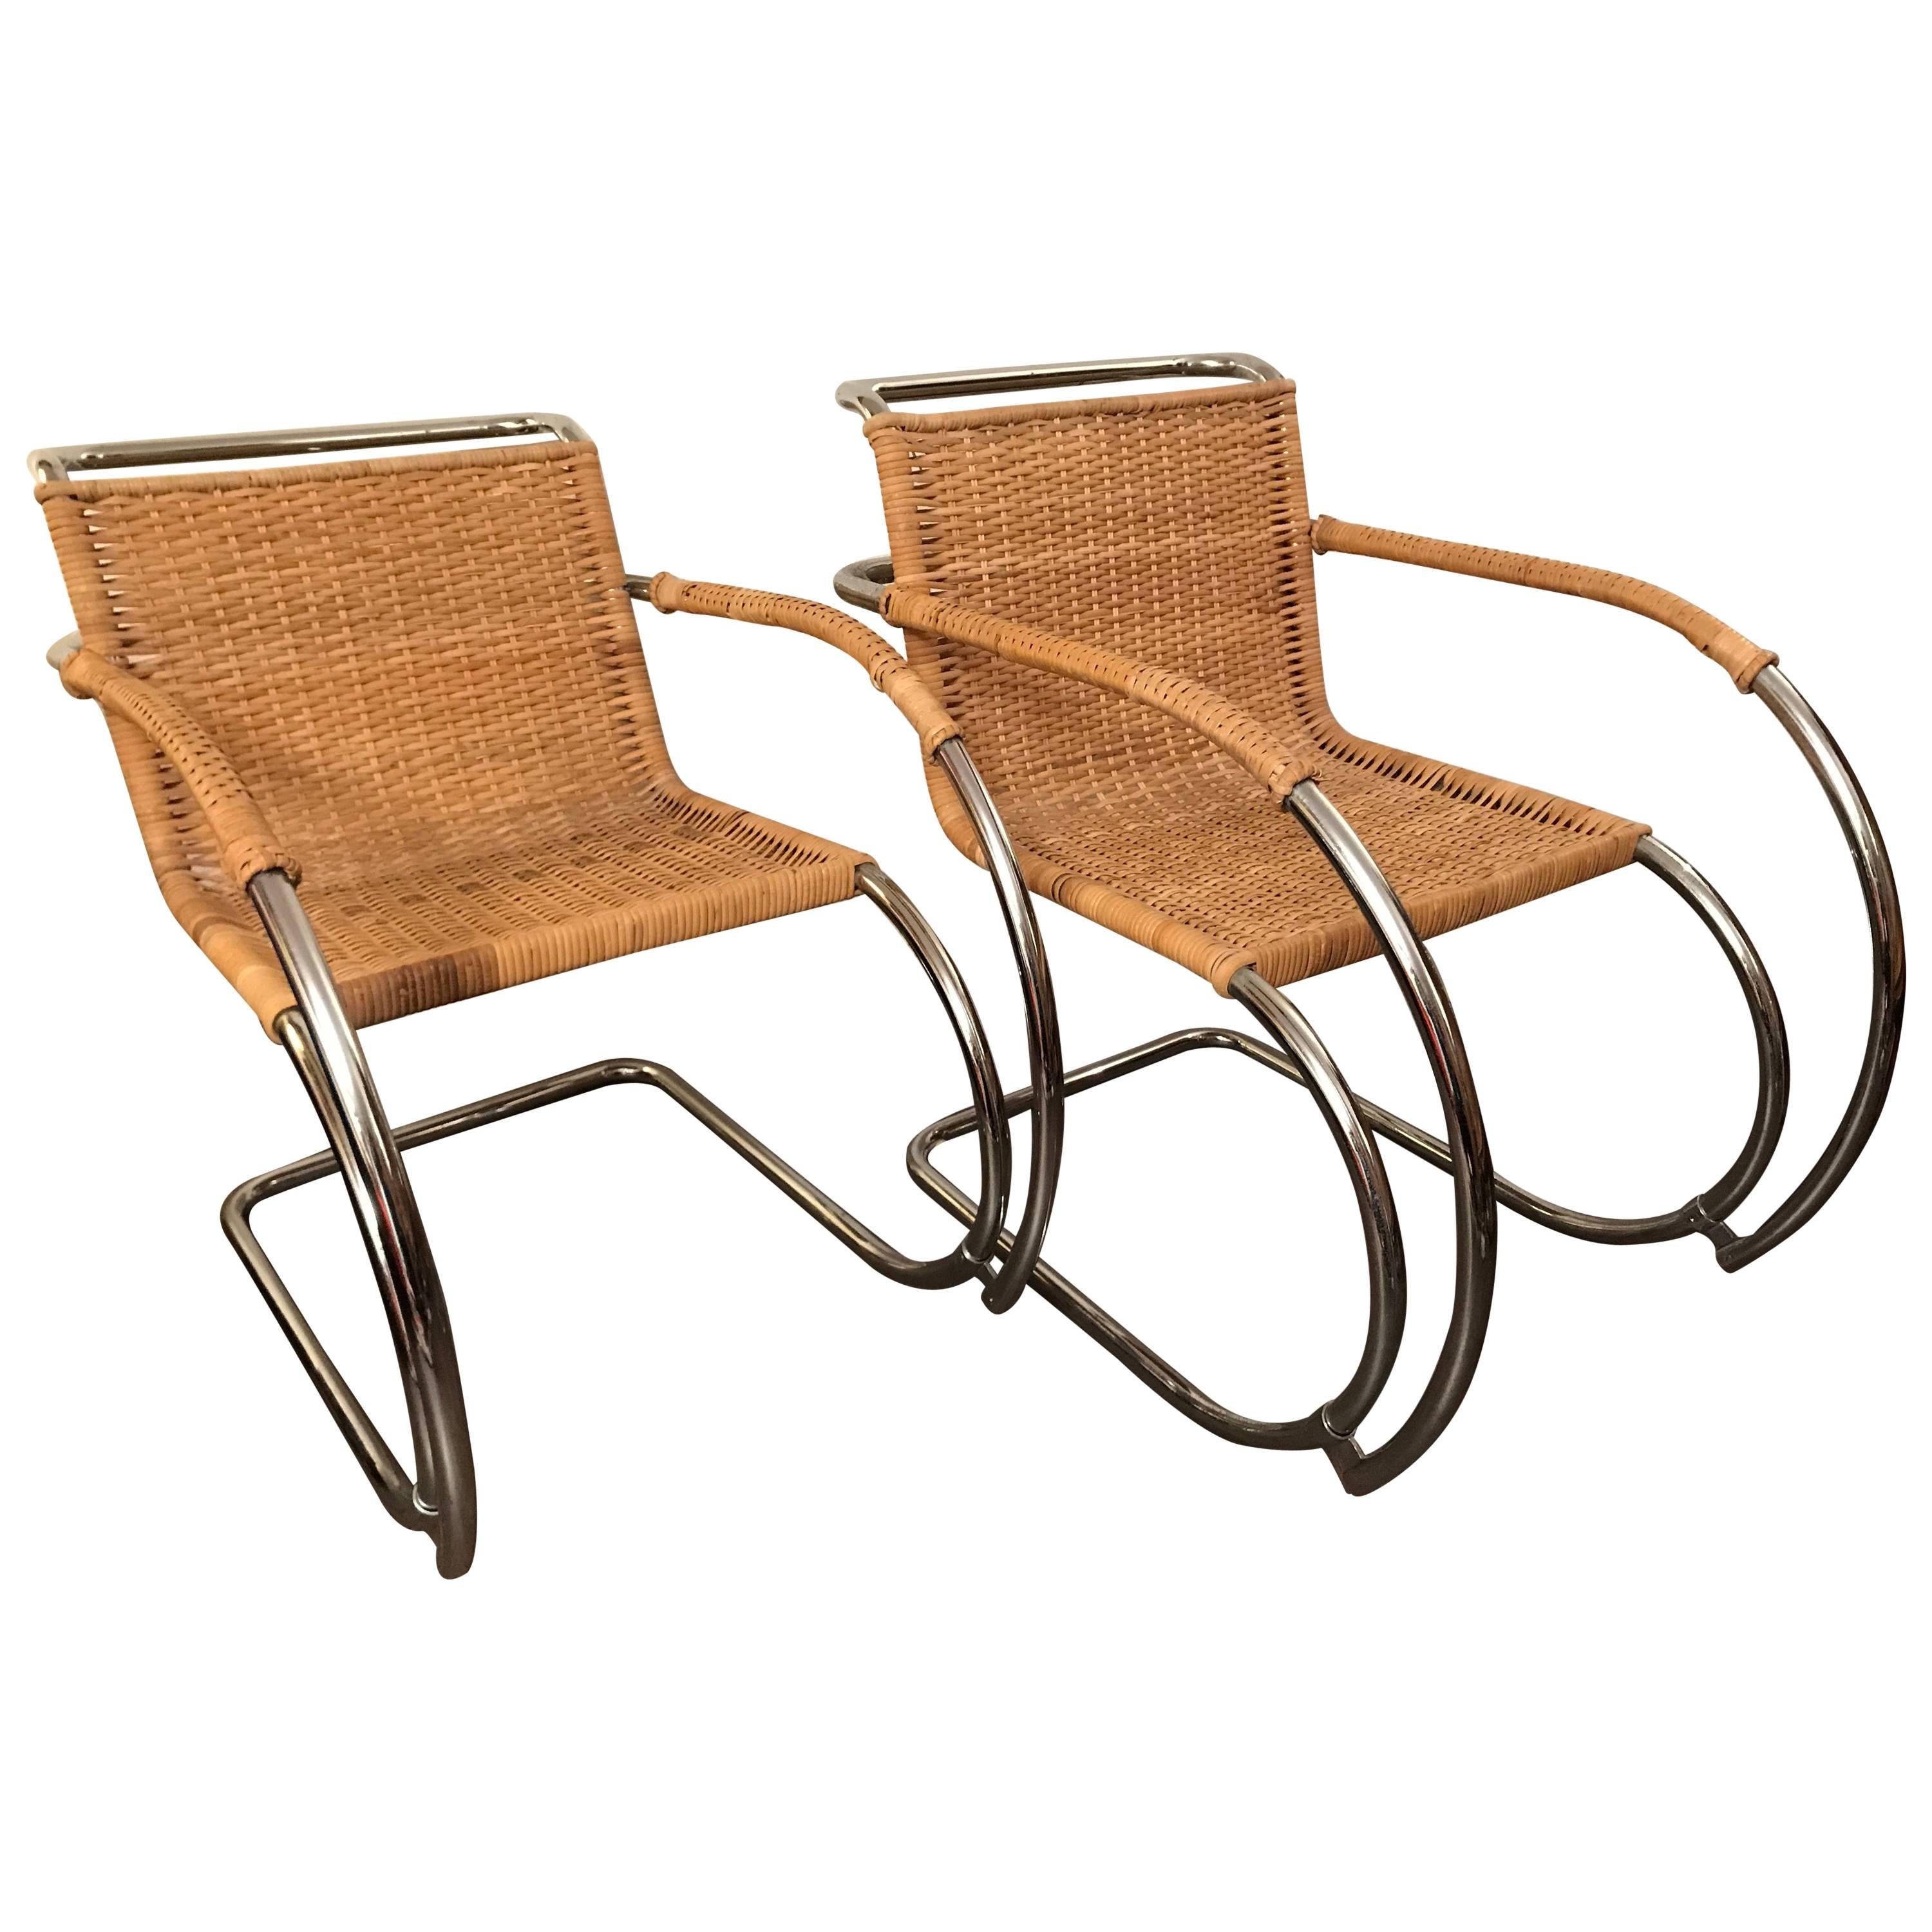 Pair of Mid-20th Century Ludwig Mies van der Rohe MR20 Rattan Chrome Armchairs